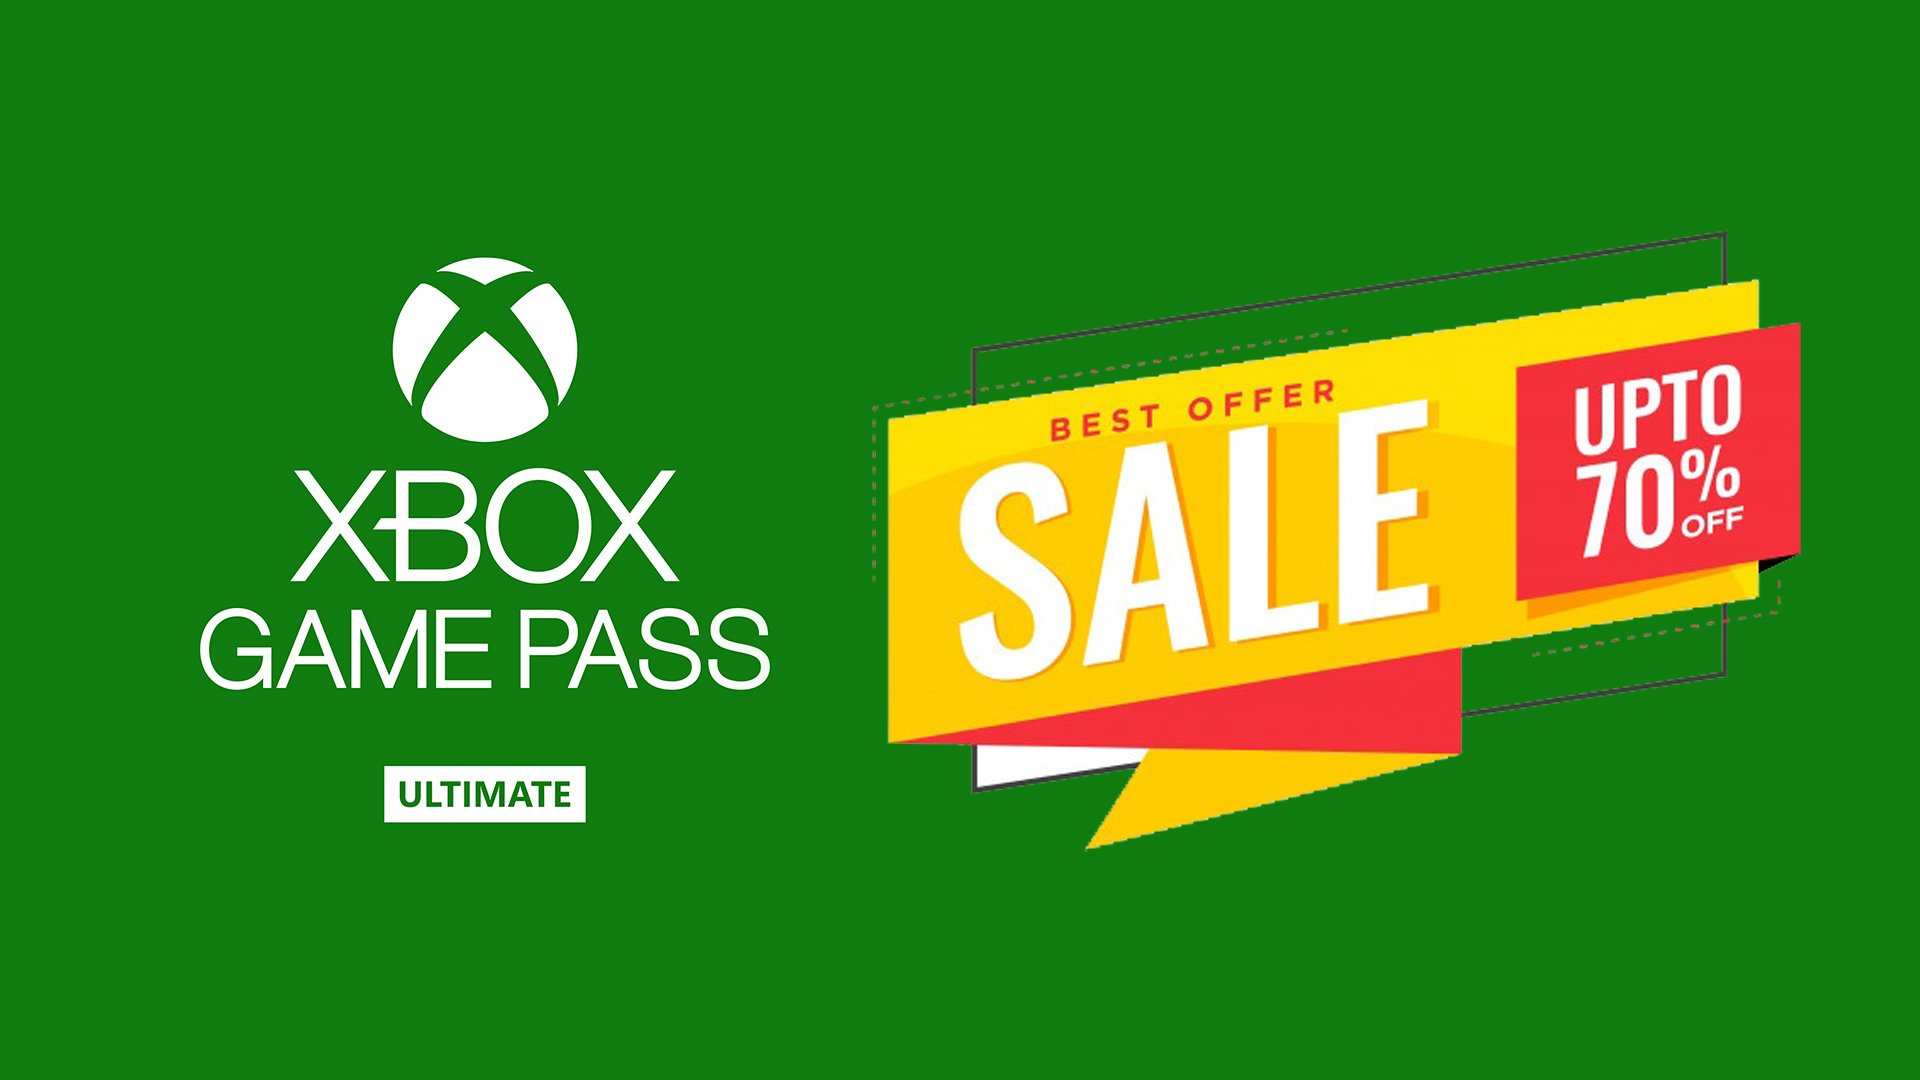 xbox game pass ultimate deals code buy cheap discount